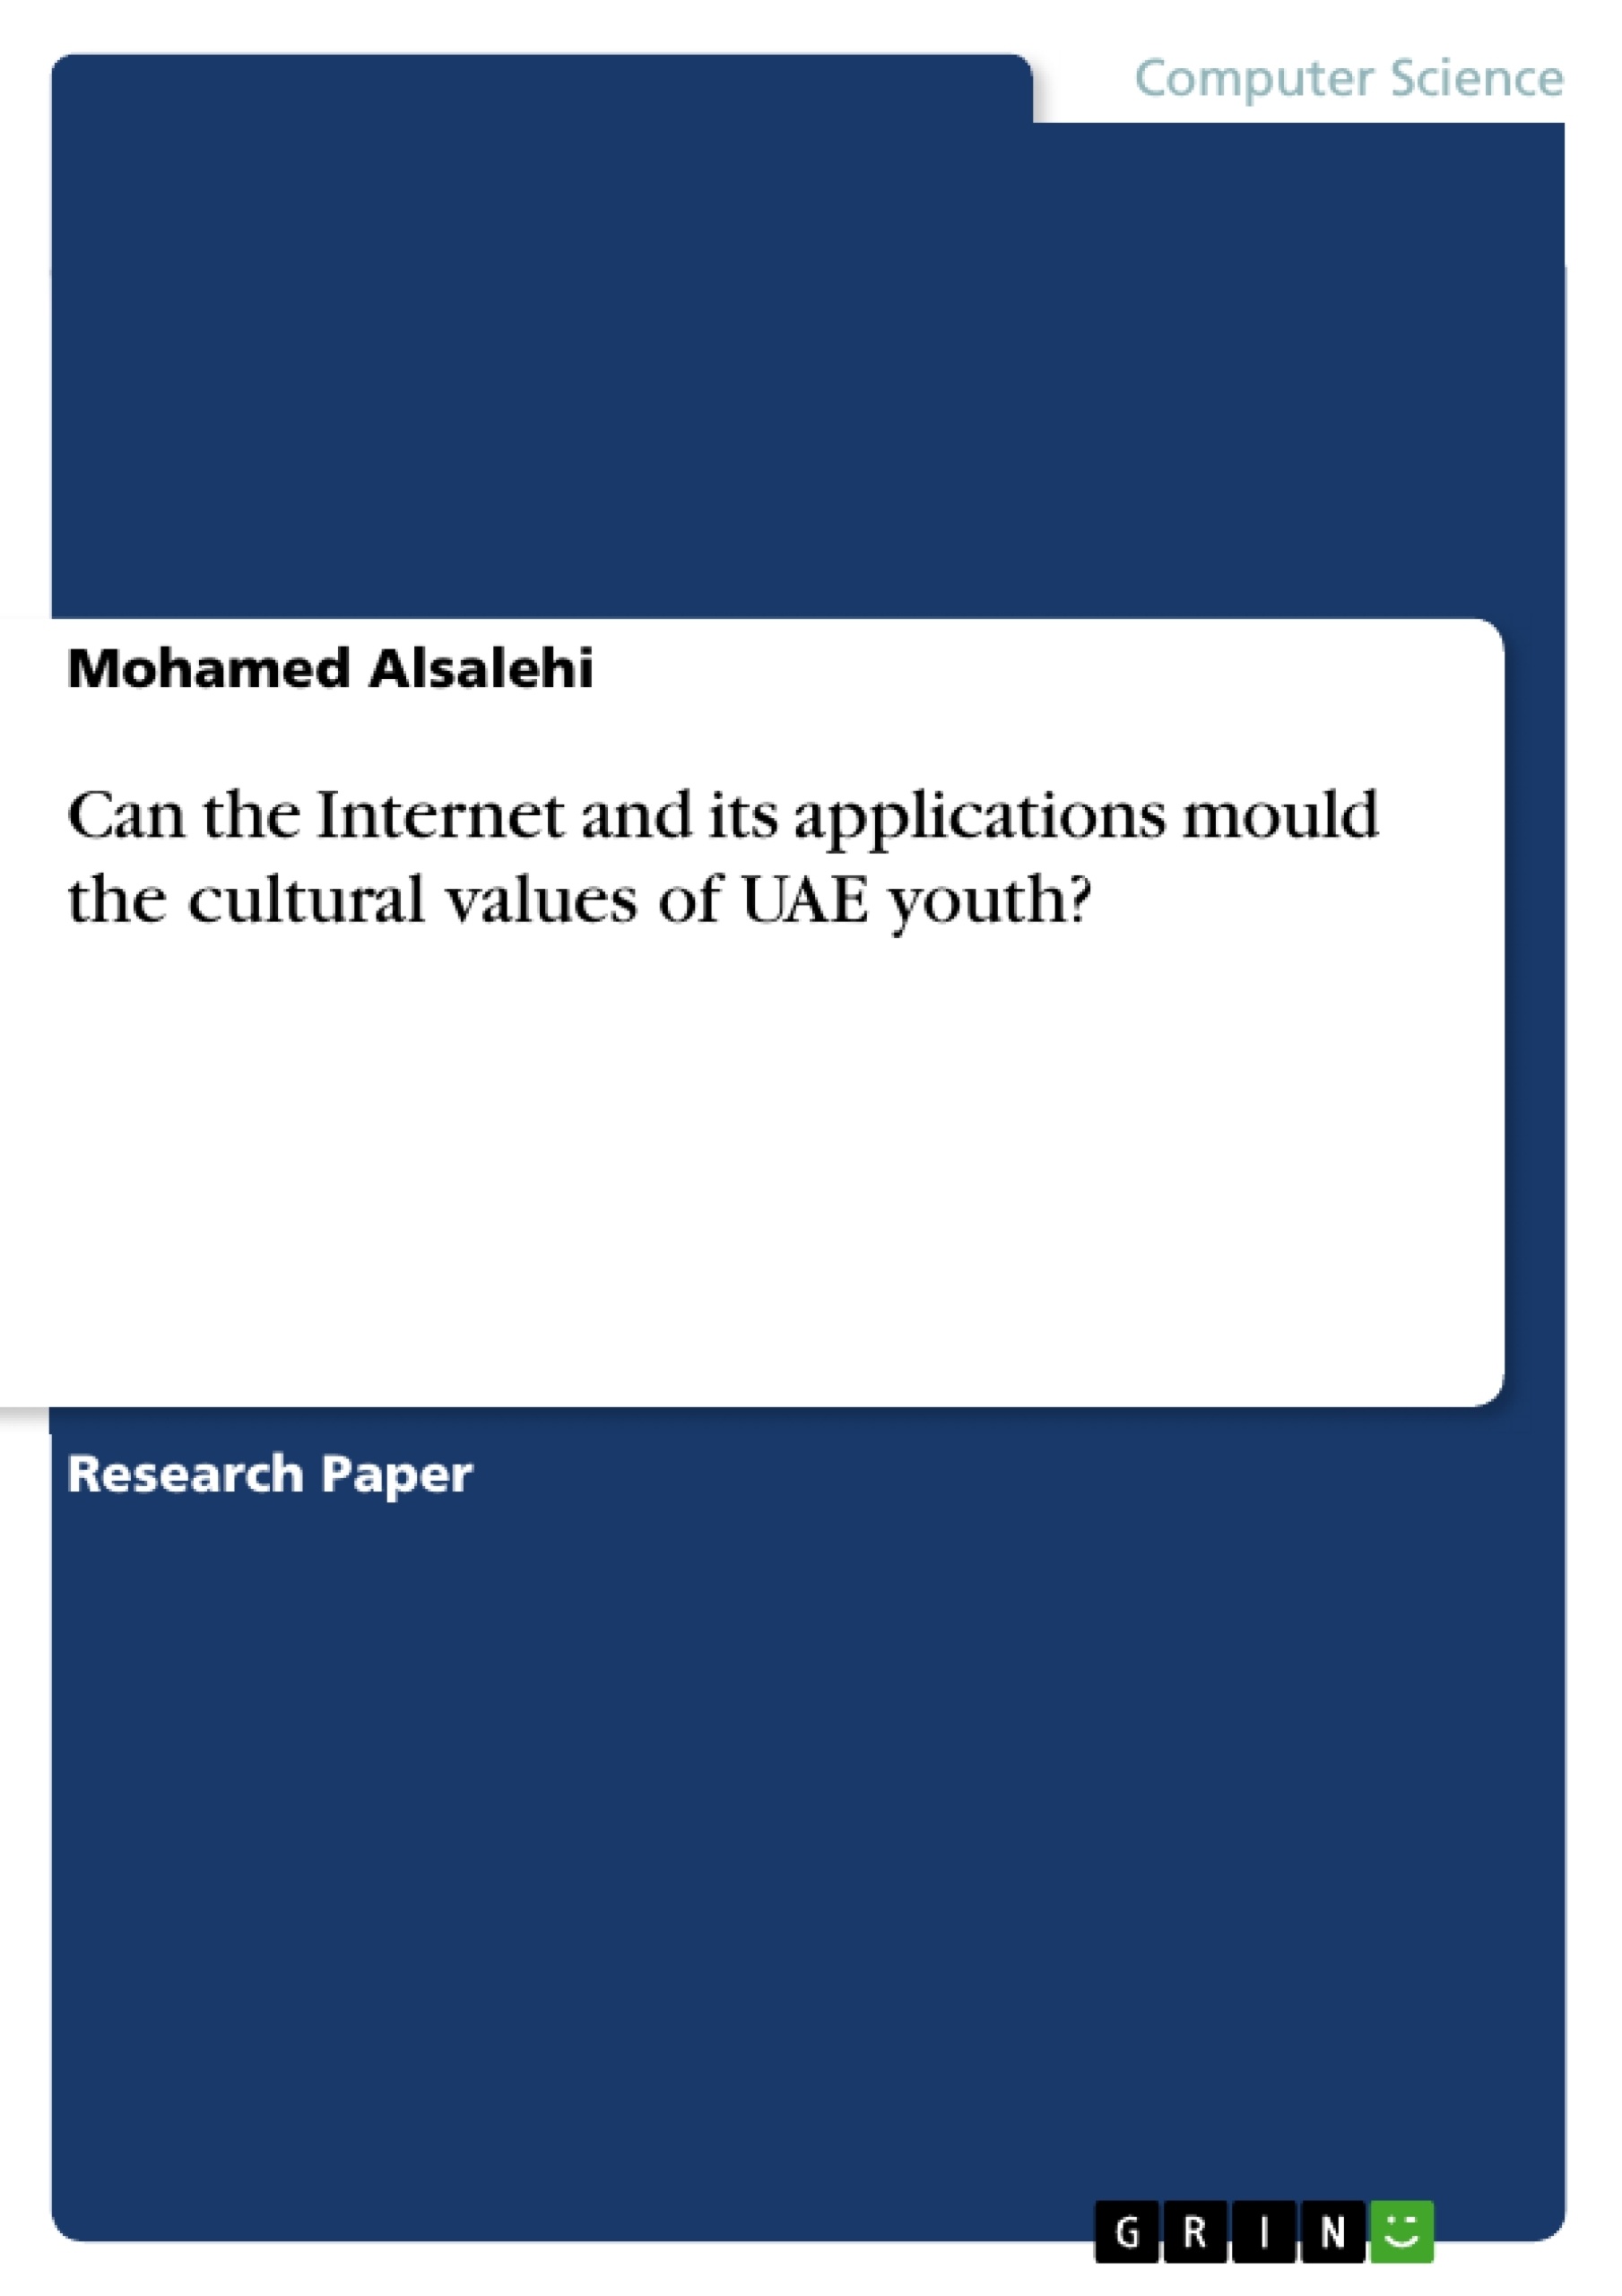 Titre: Can the Internet and its applications mould the cultural values of UAE youth?